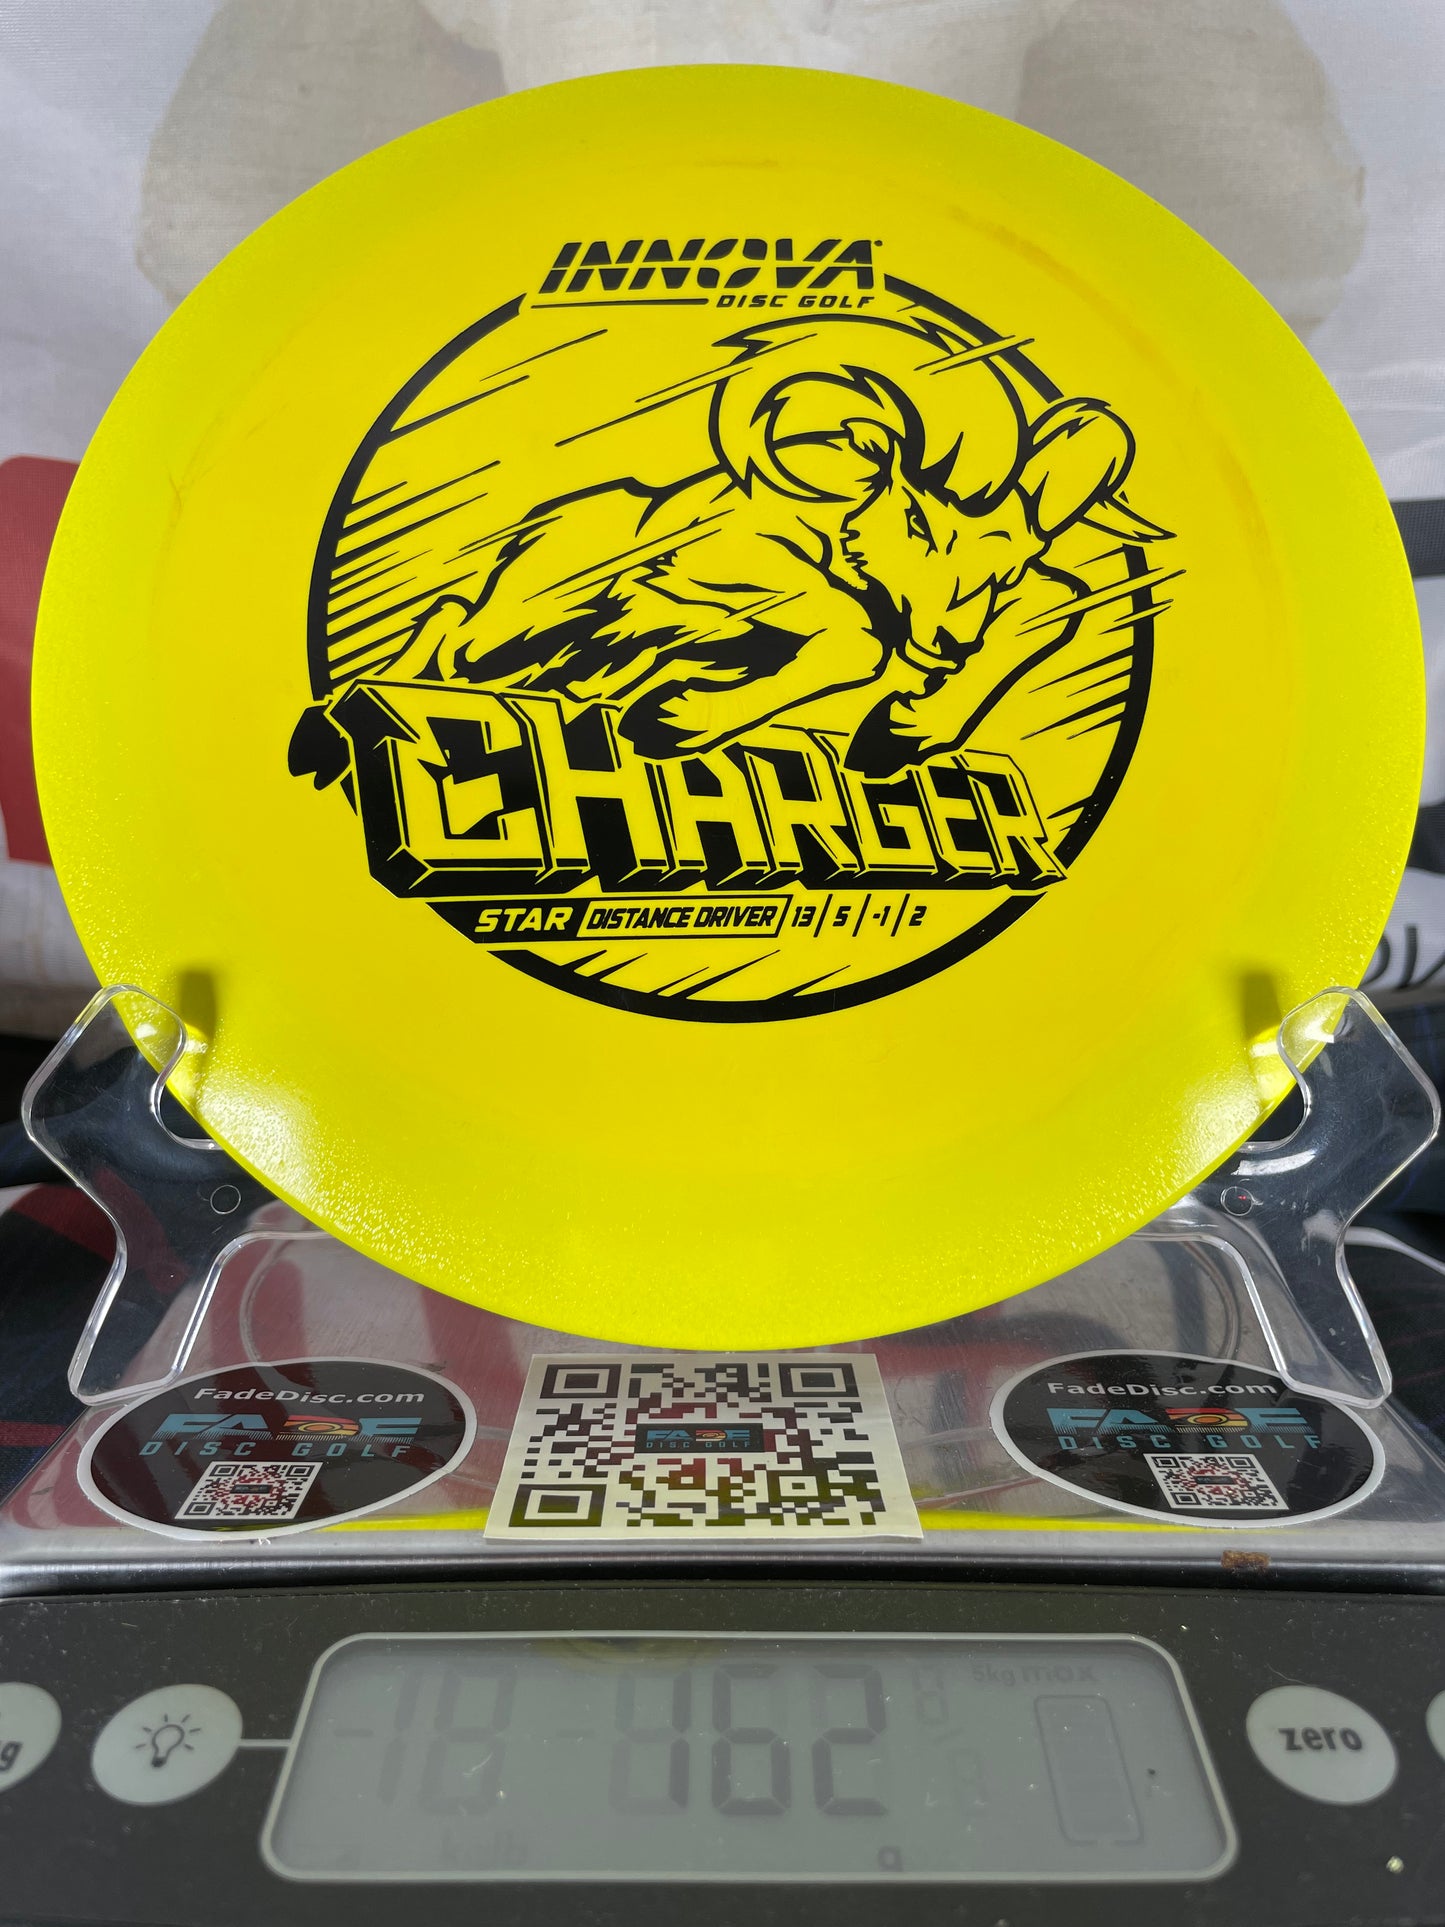 Innova Charger Star 162g Yellow w/ Black Foil Distance Driver